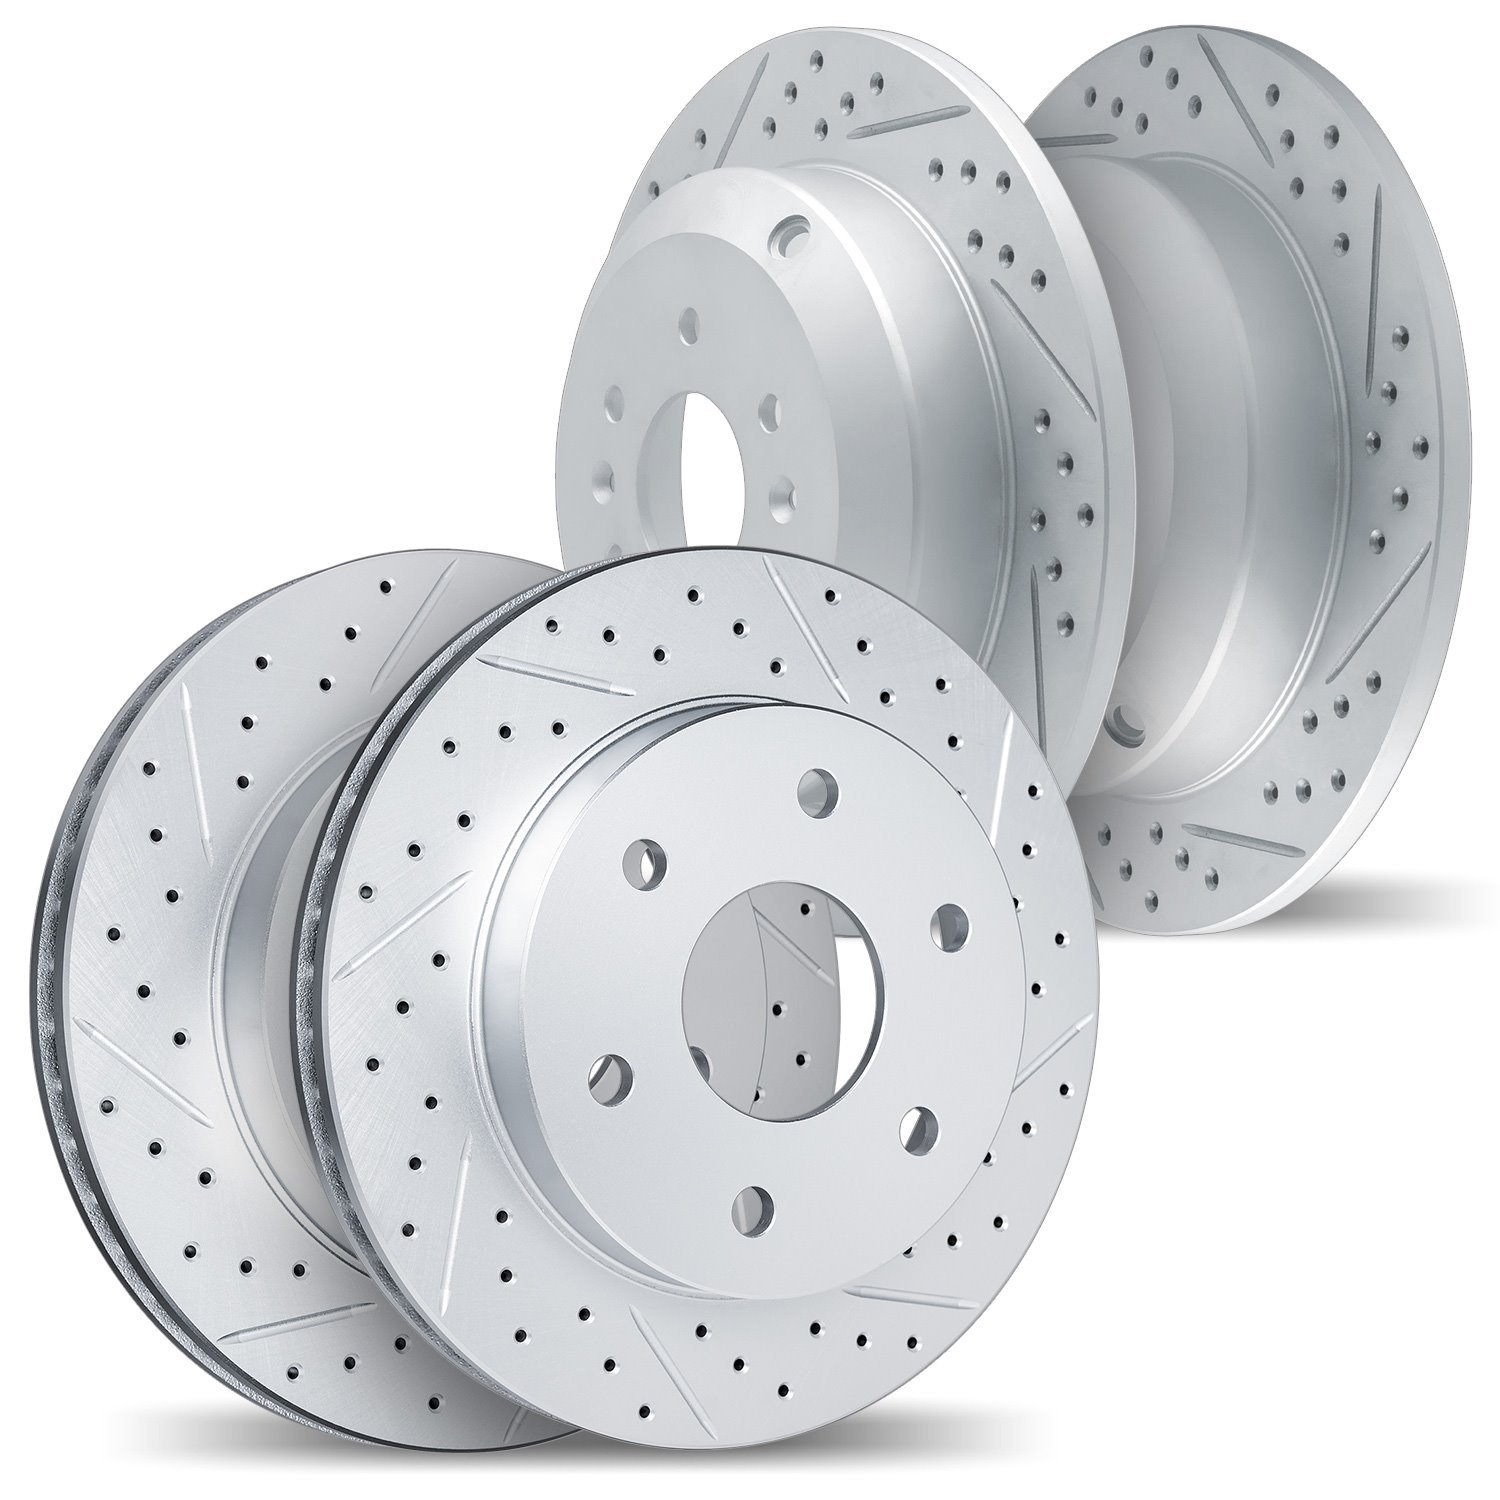 2004-40061 Geoperformance Drilled/Slotted Brake Rotors, Fits Select Multiple Makes/Models, Position: Front and Rear